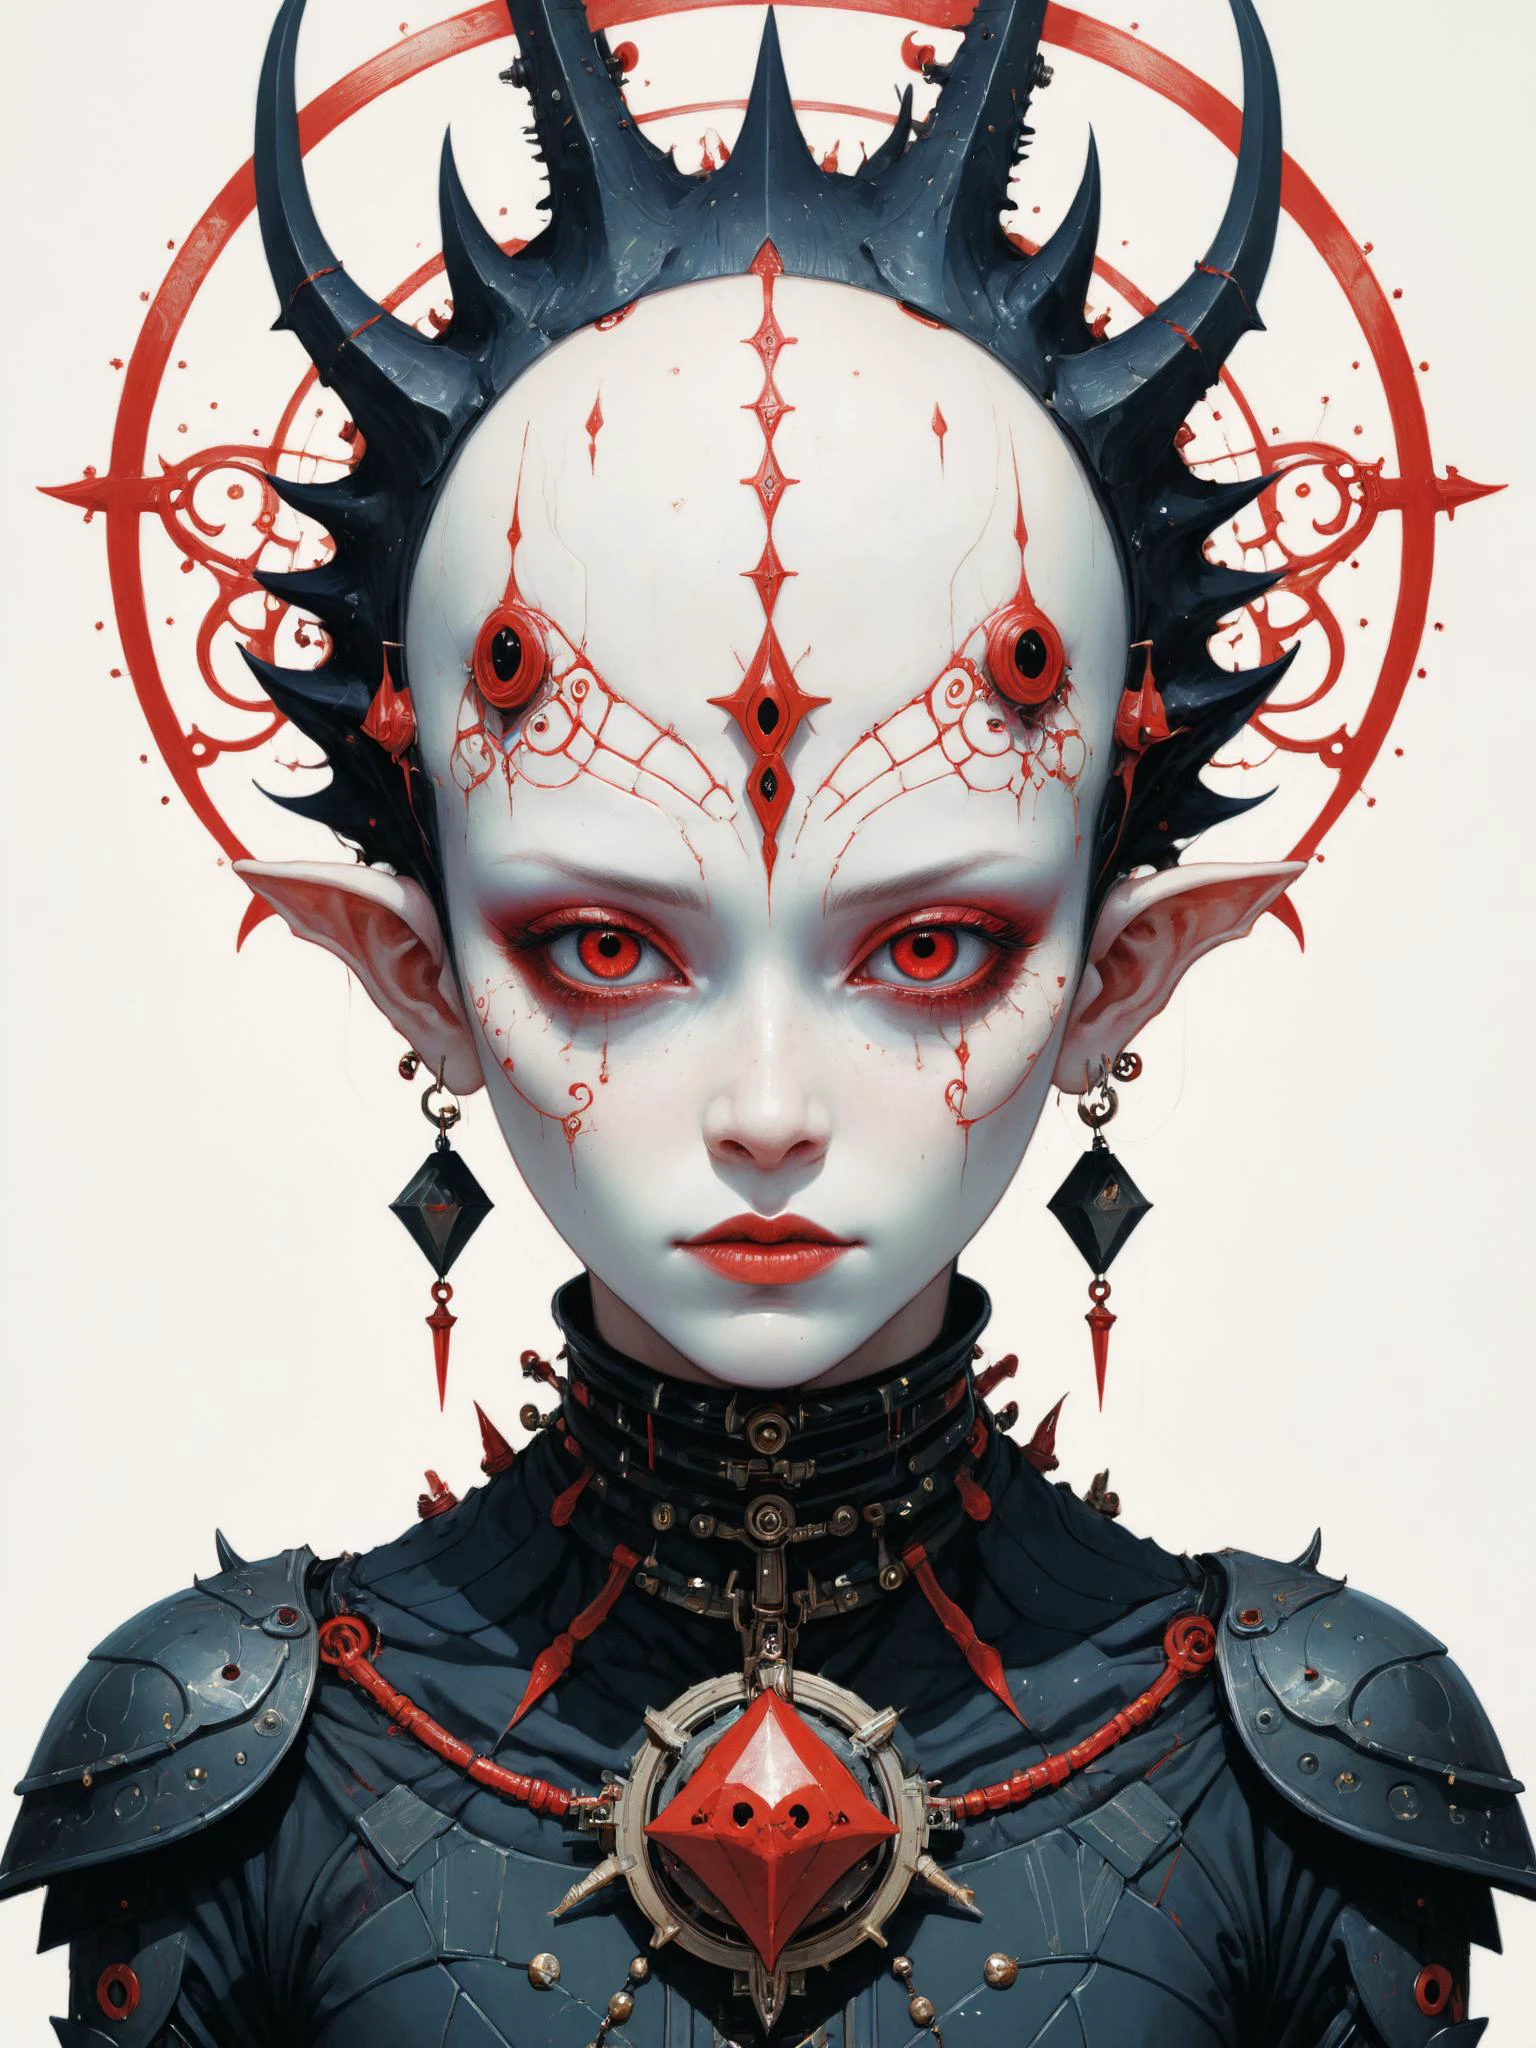 imaginary professional 3d rendering of a humanid alien race, delicate face, chalk white skin tattooed with occult esoteric symbols in bloodred ink, rings, spikes and rivets pierce the skin, the devilish eyes exsueds power and dominance, 8k, (by Artist Victo Ngai:2),(by Artist Yoji Shinkawa:2),(by Artist Ted Nasmith:2),(Queercore Art:2),(Tonalism:2)